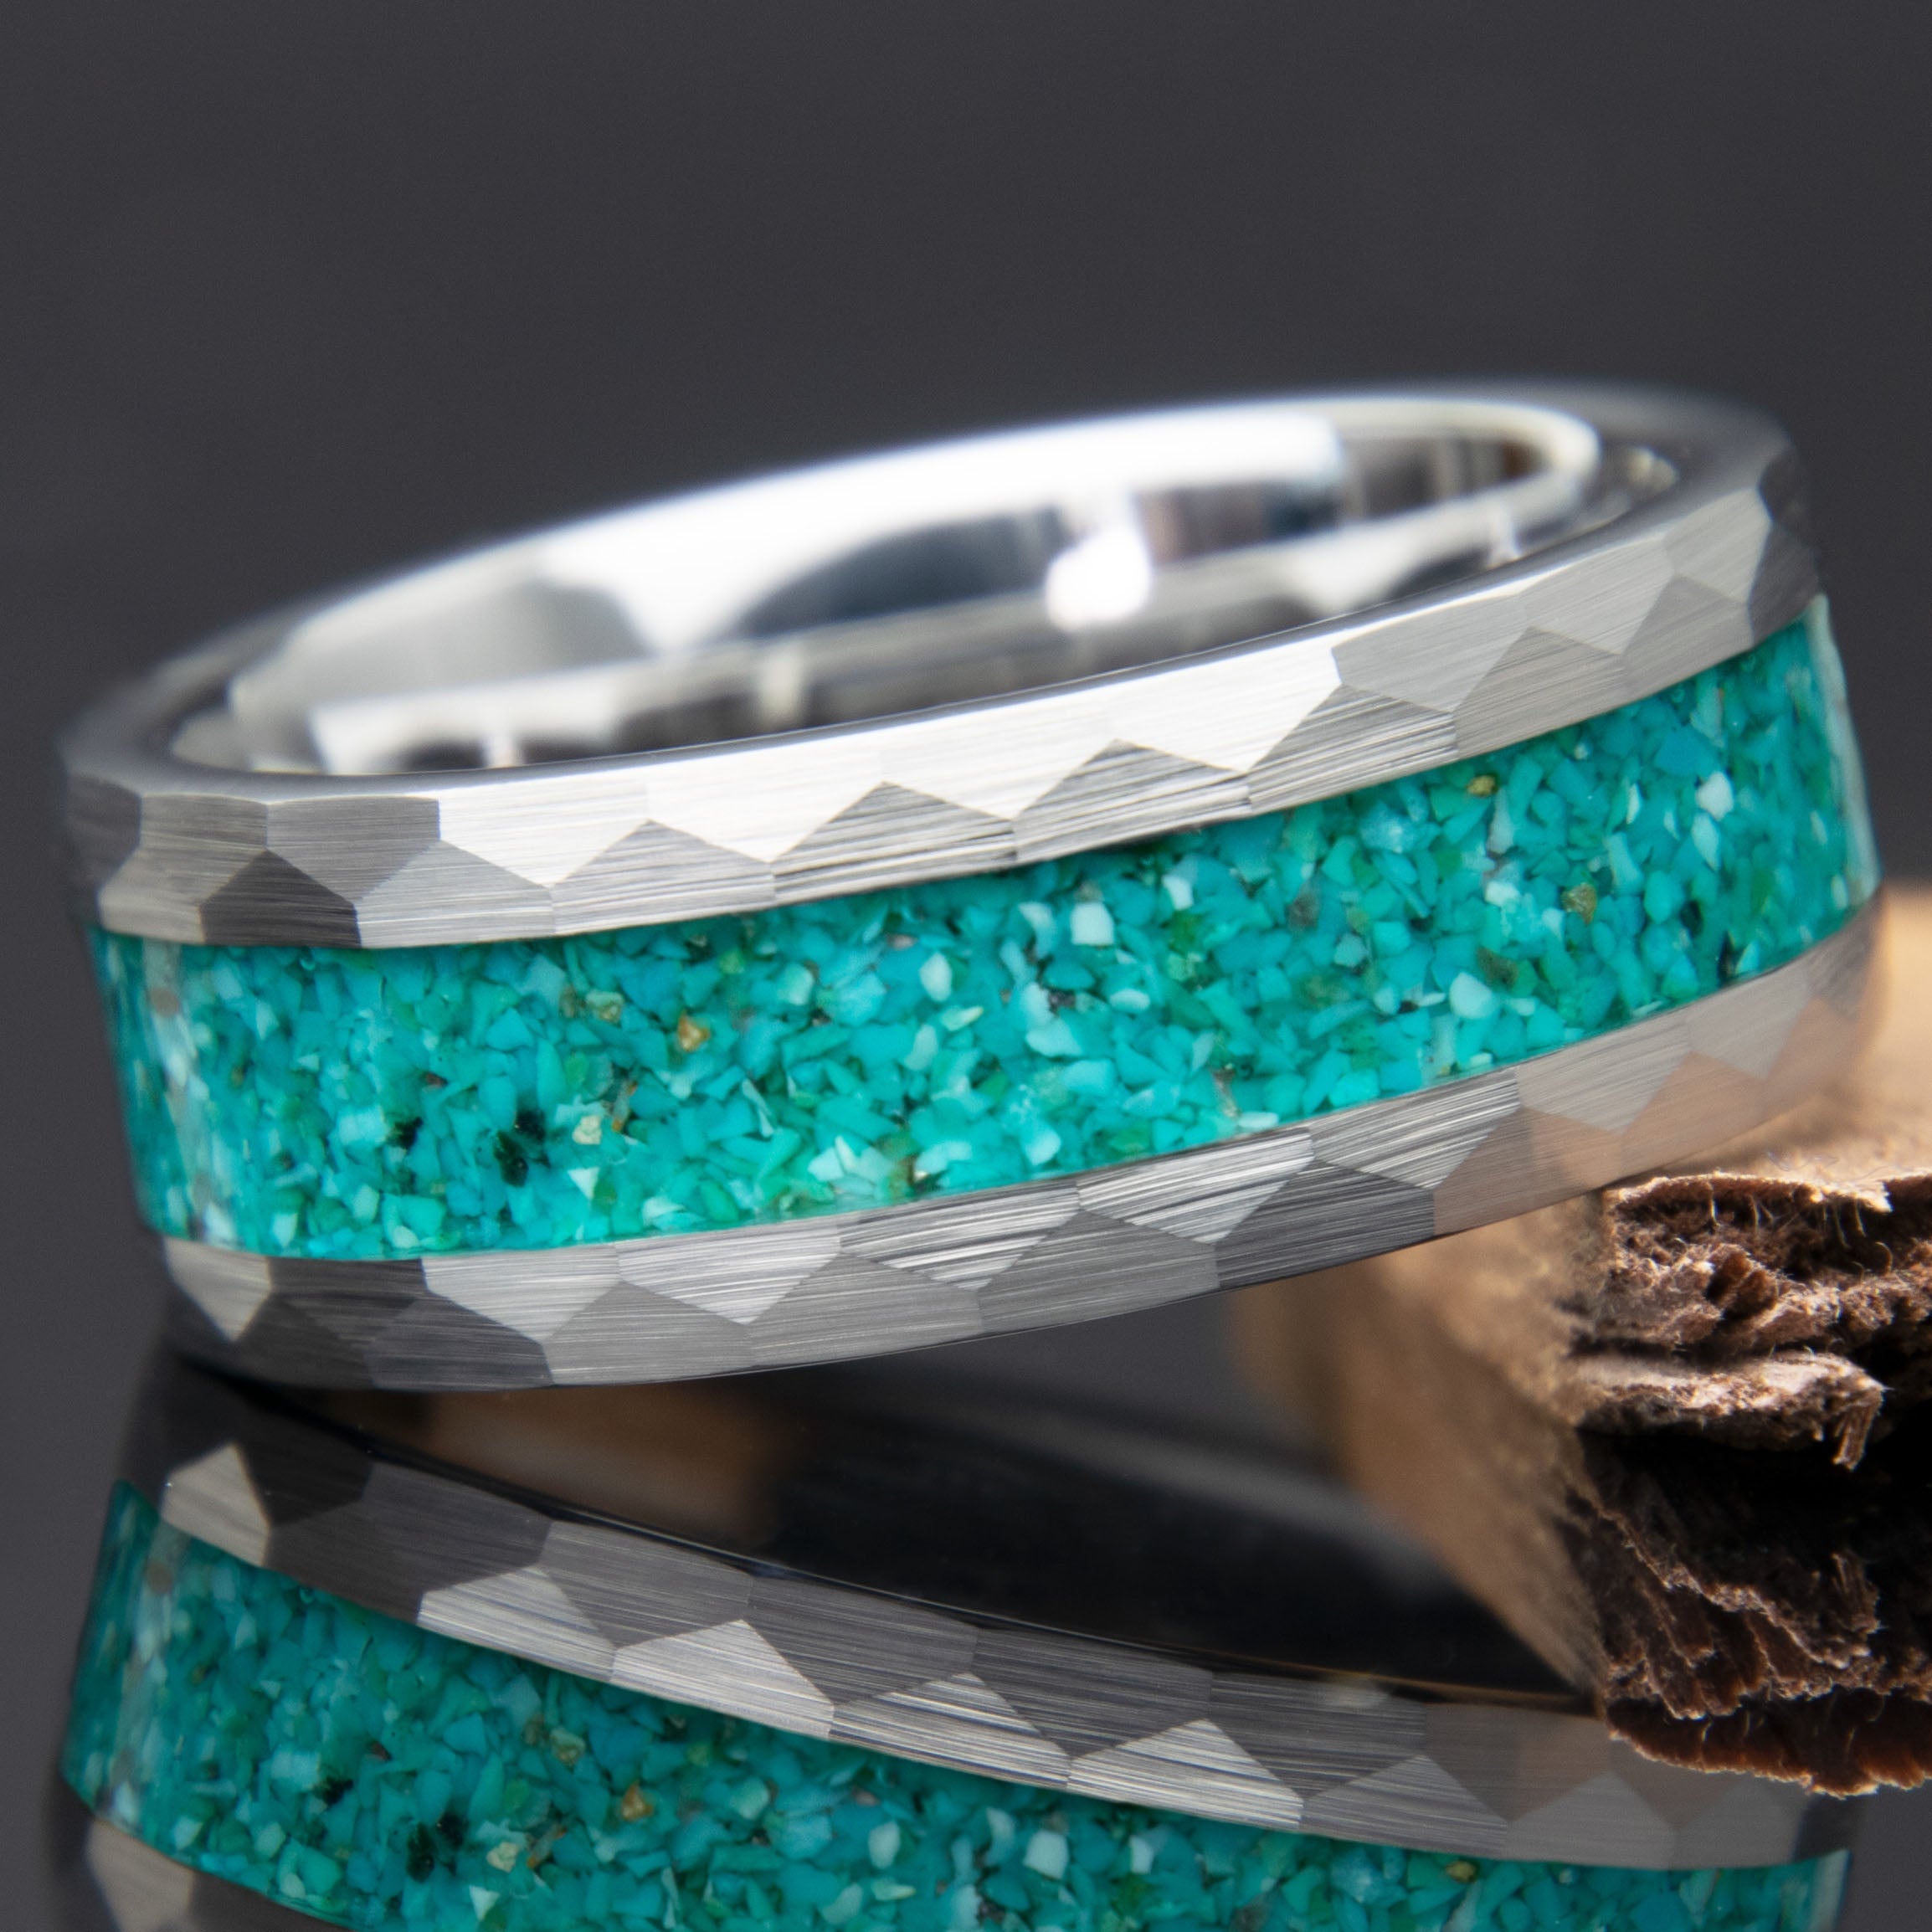 Turquoise Hammered Tungsten Men's Ring Copperbeard Jewelry